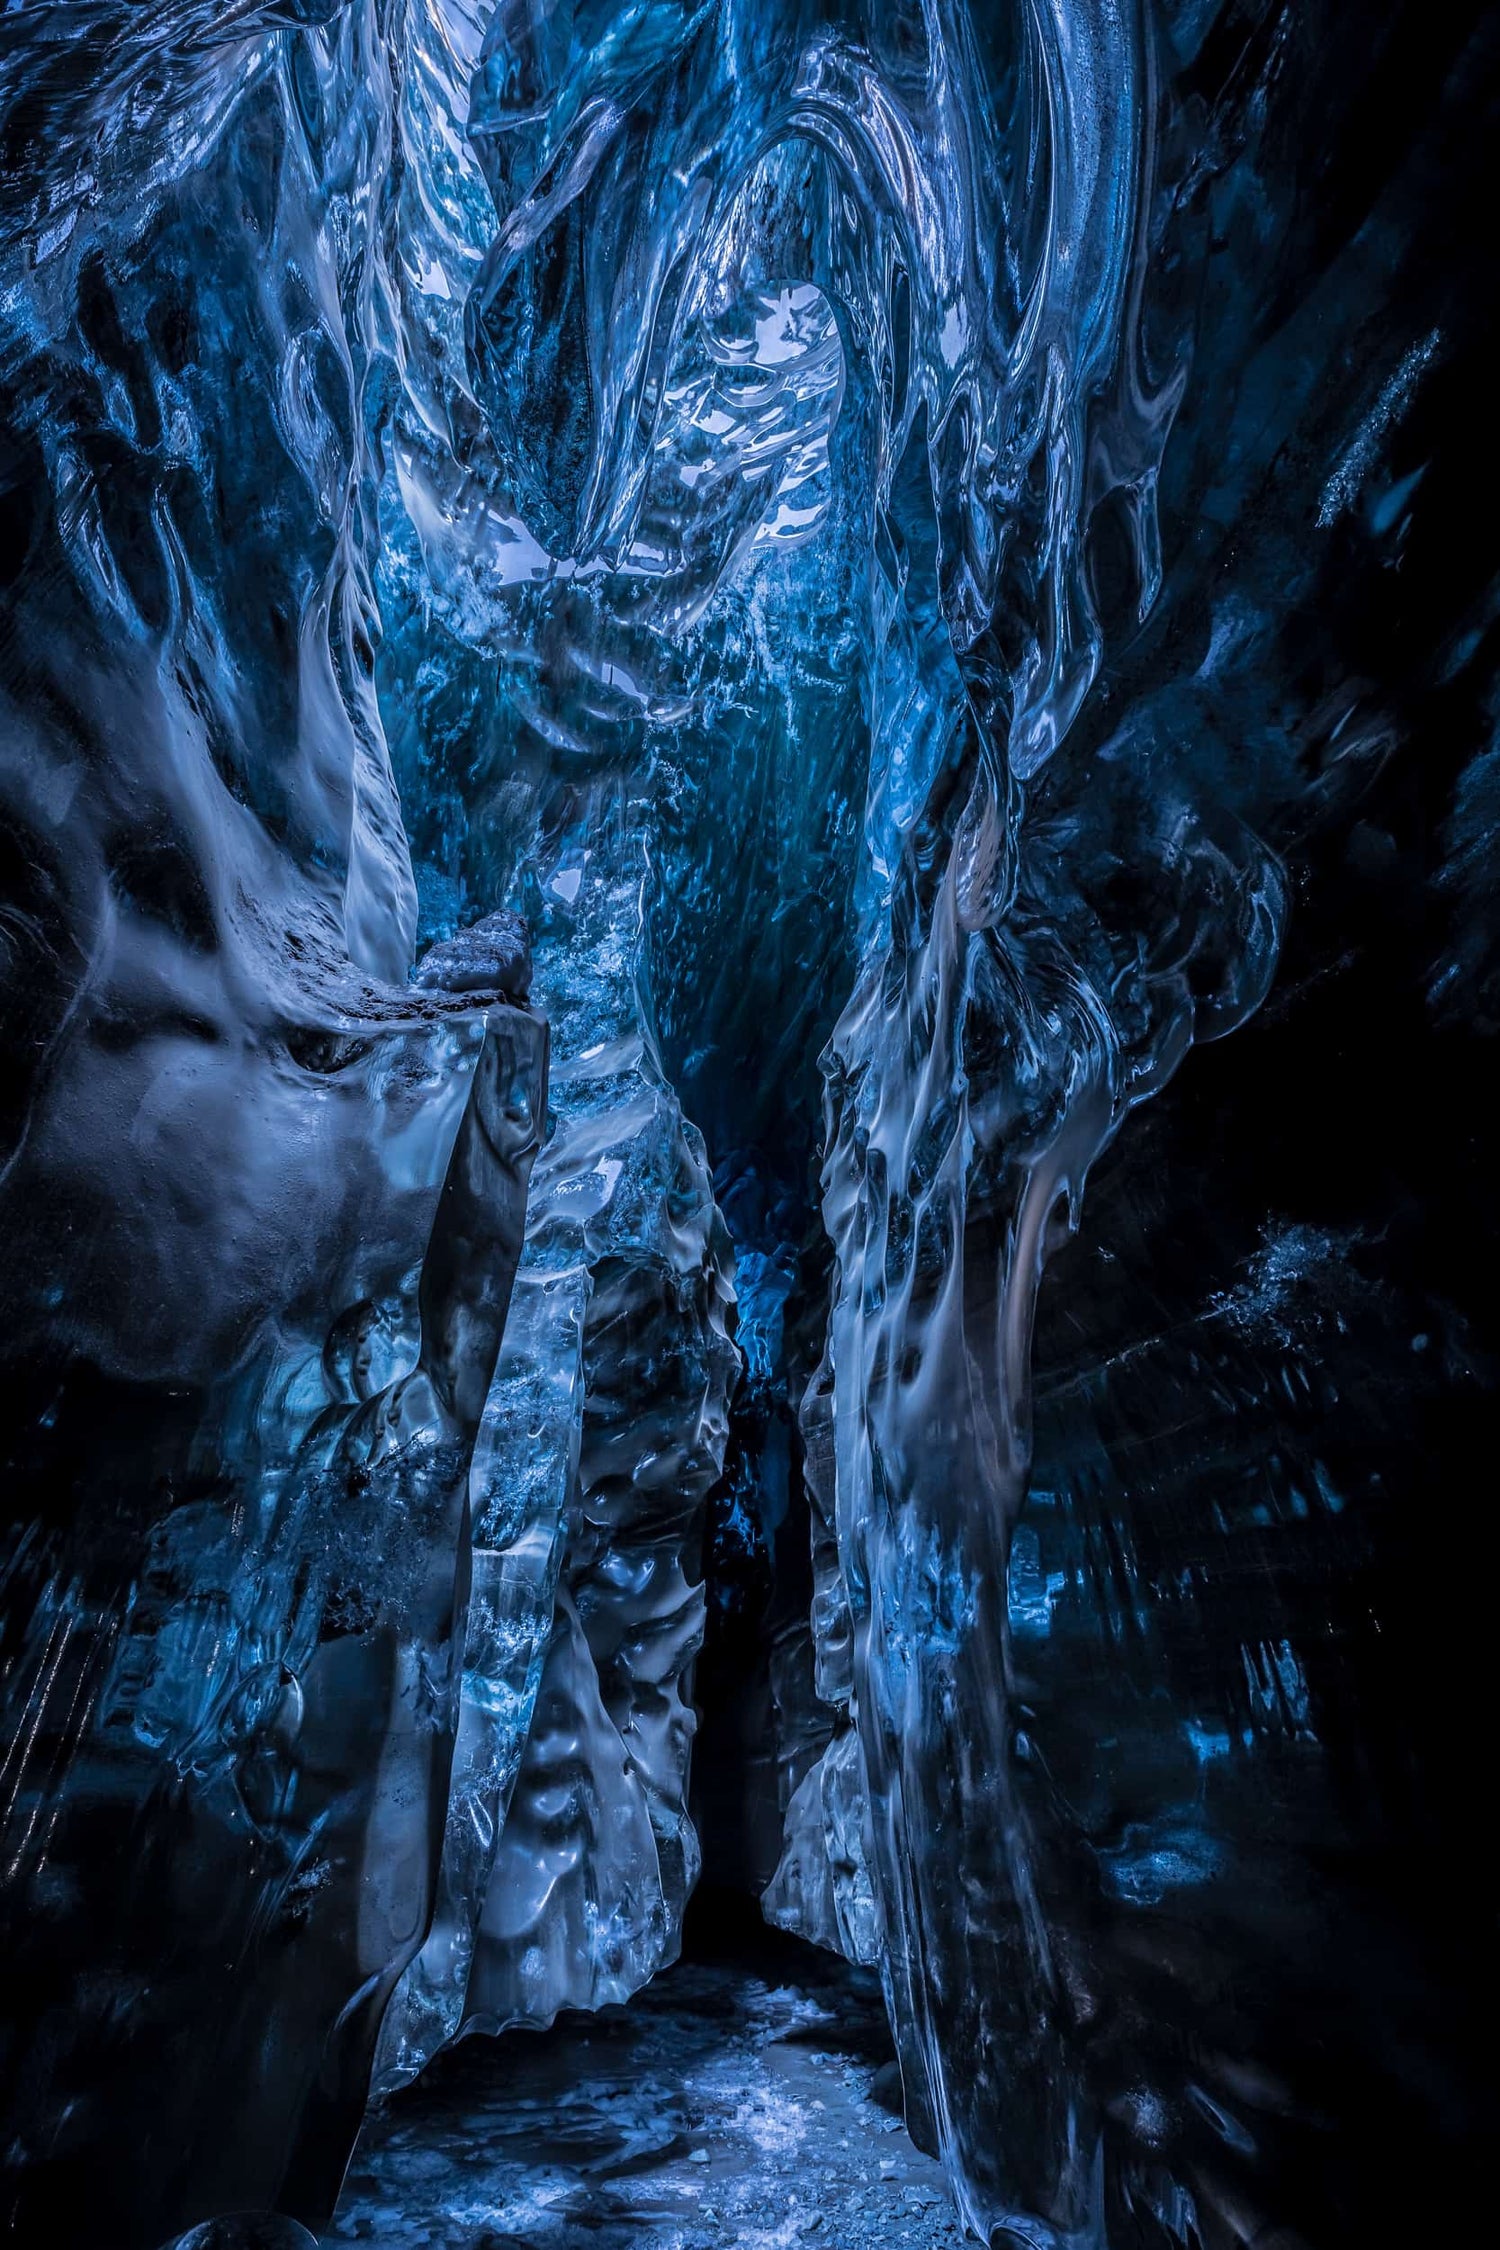 The artpiece 'Anatomy of Ice' by Markus van Hauten which shows an intricately patterned ice cave wall and ceiling.